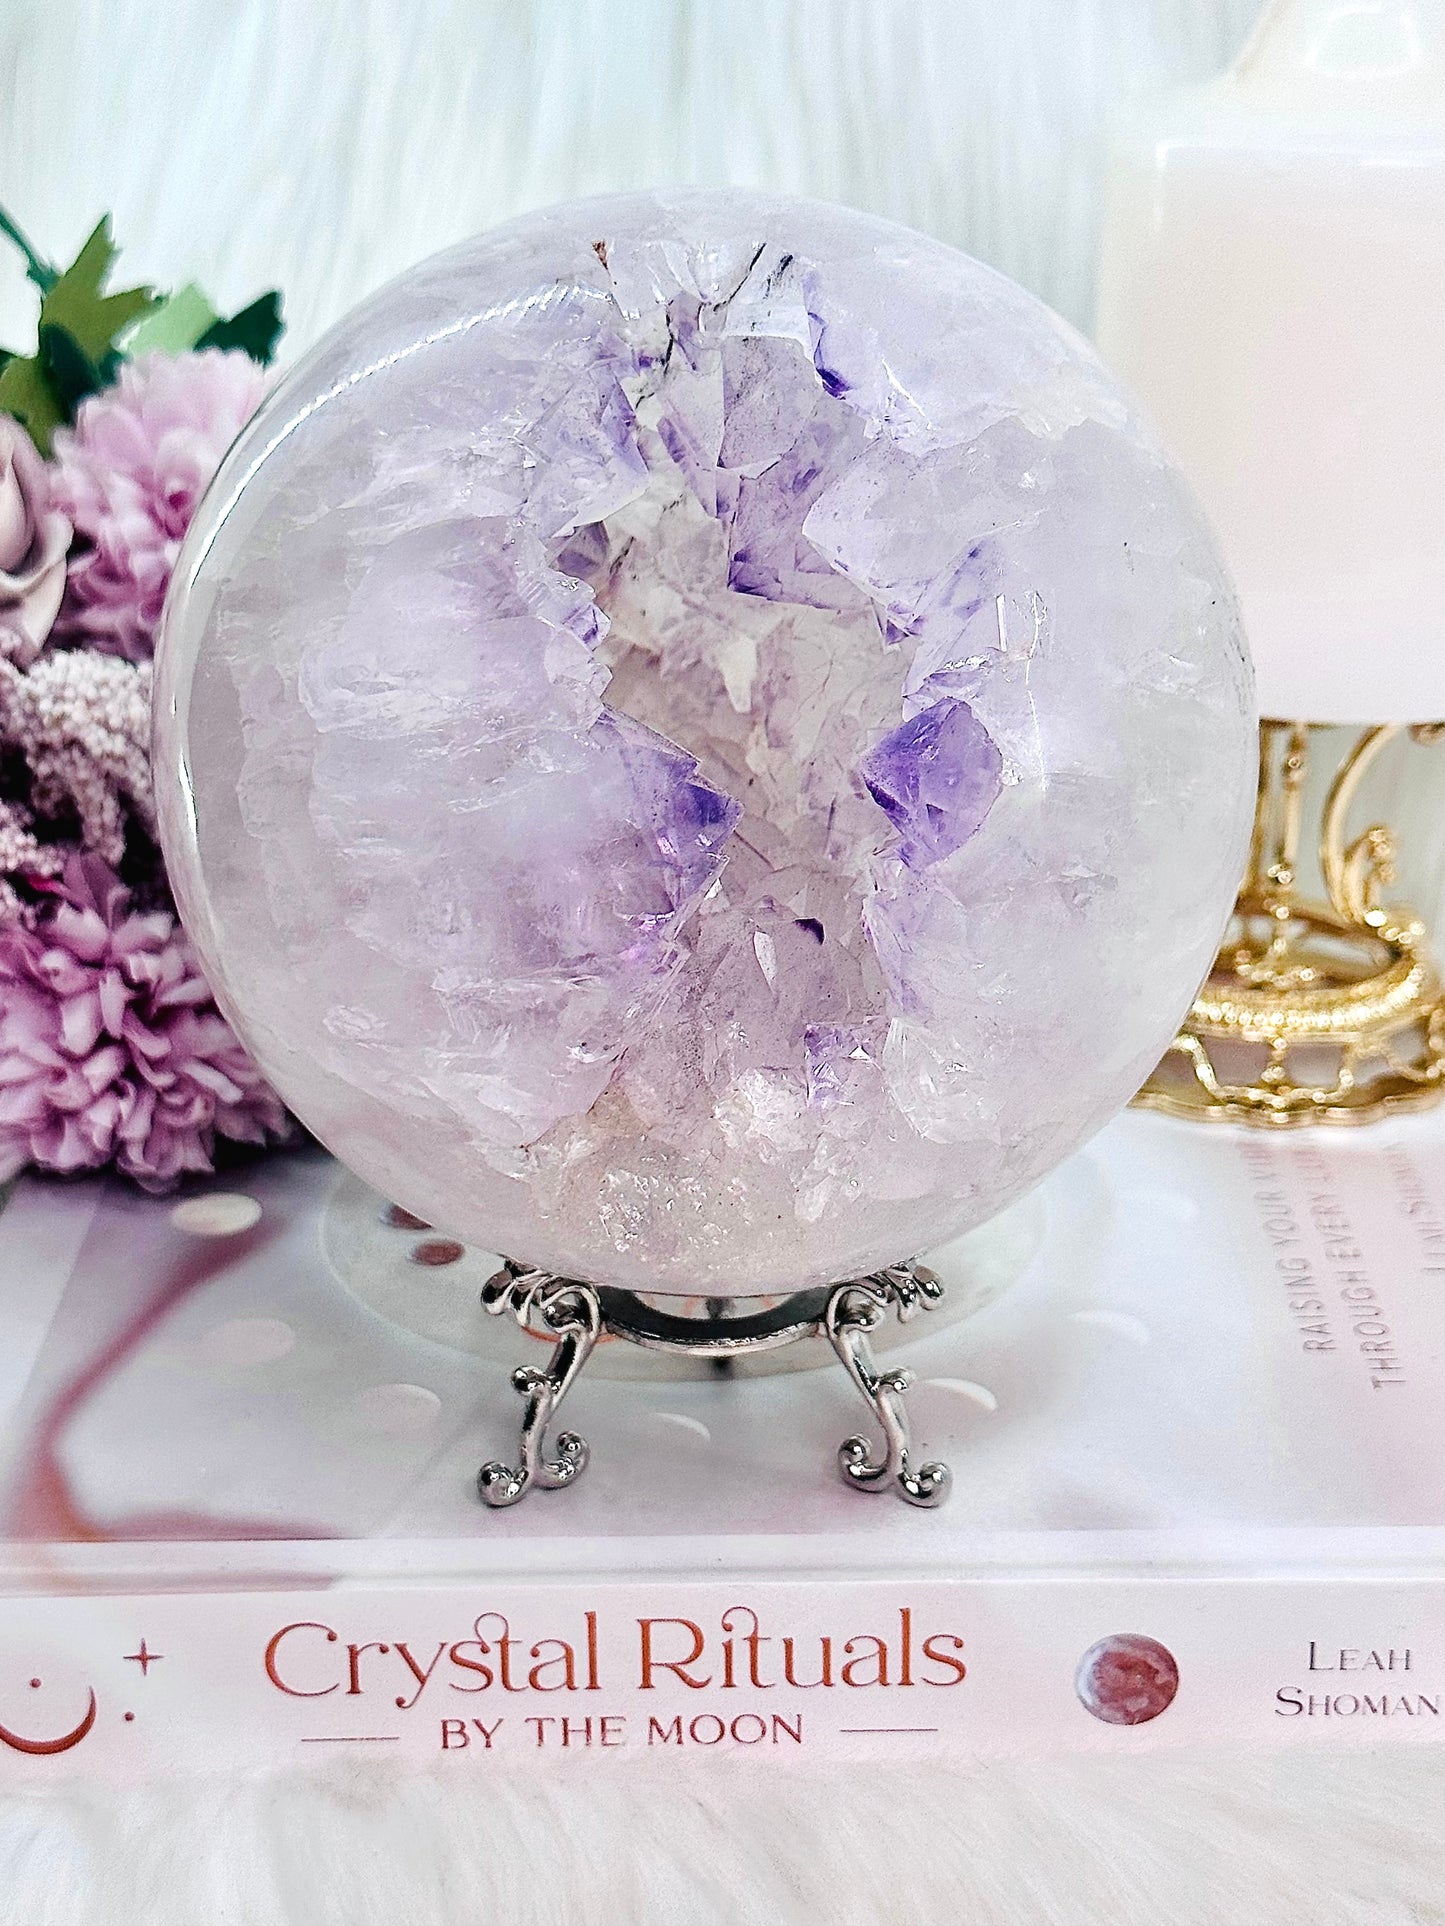 Classy & Fabulous Huge 2KG Druzy Amethyst In Quartz Sphere on Stand From Brazil ~ An Absolute Masterpiece